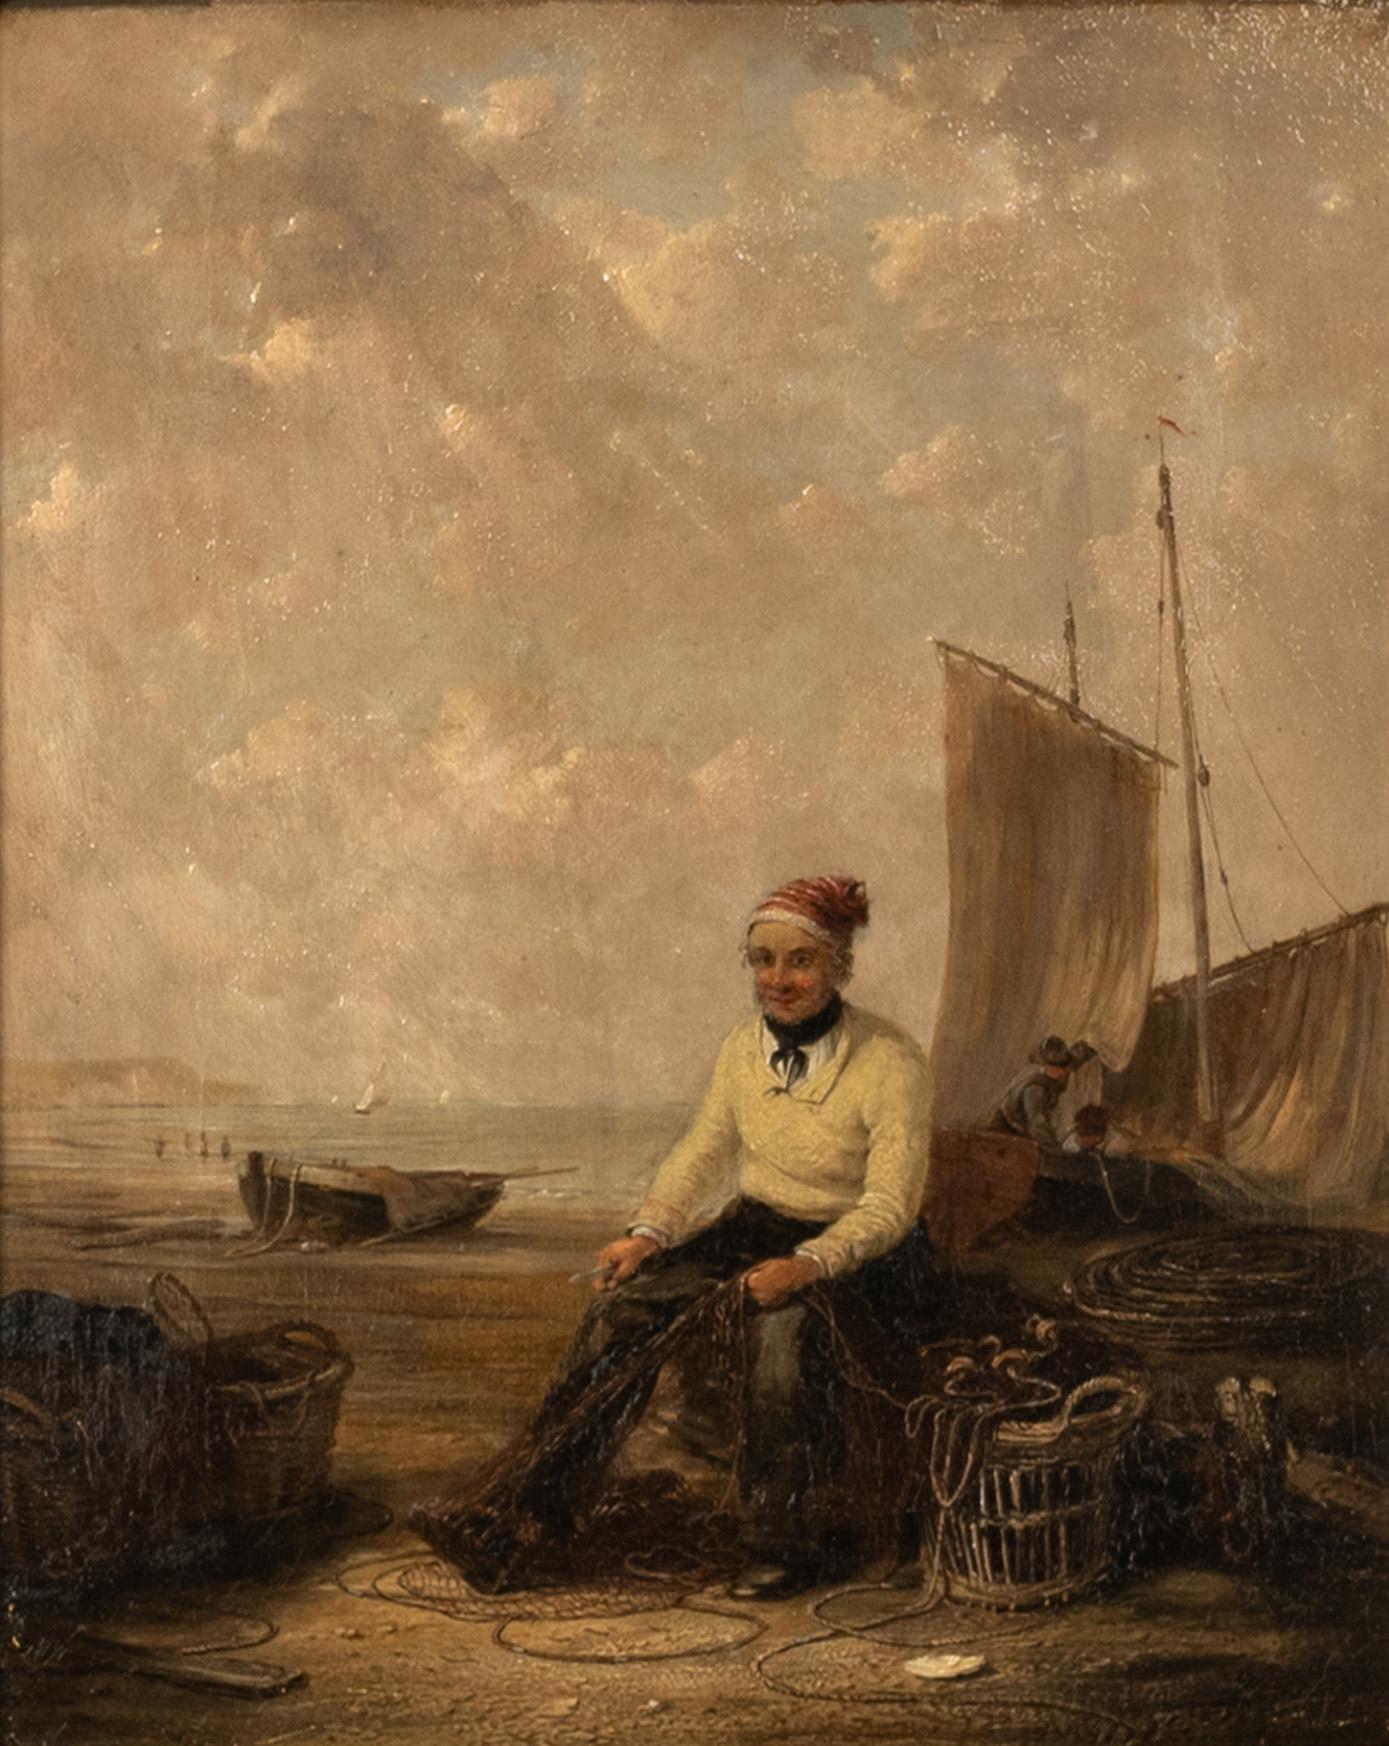 A good & whimsical oil on canvas painting by the Irish painter William P. Rogers (fl 1846-1872). The work depicts a fisherman mending his nets, with baskets & ropes to the foreground and fishing vessels & other fishermen to the background. Housed in